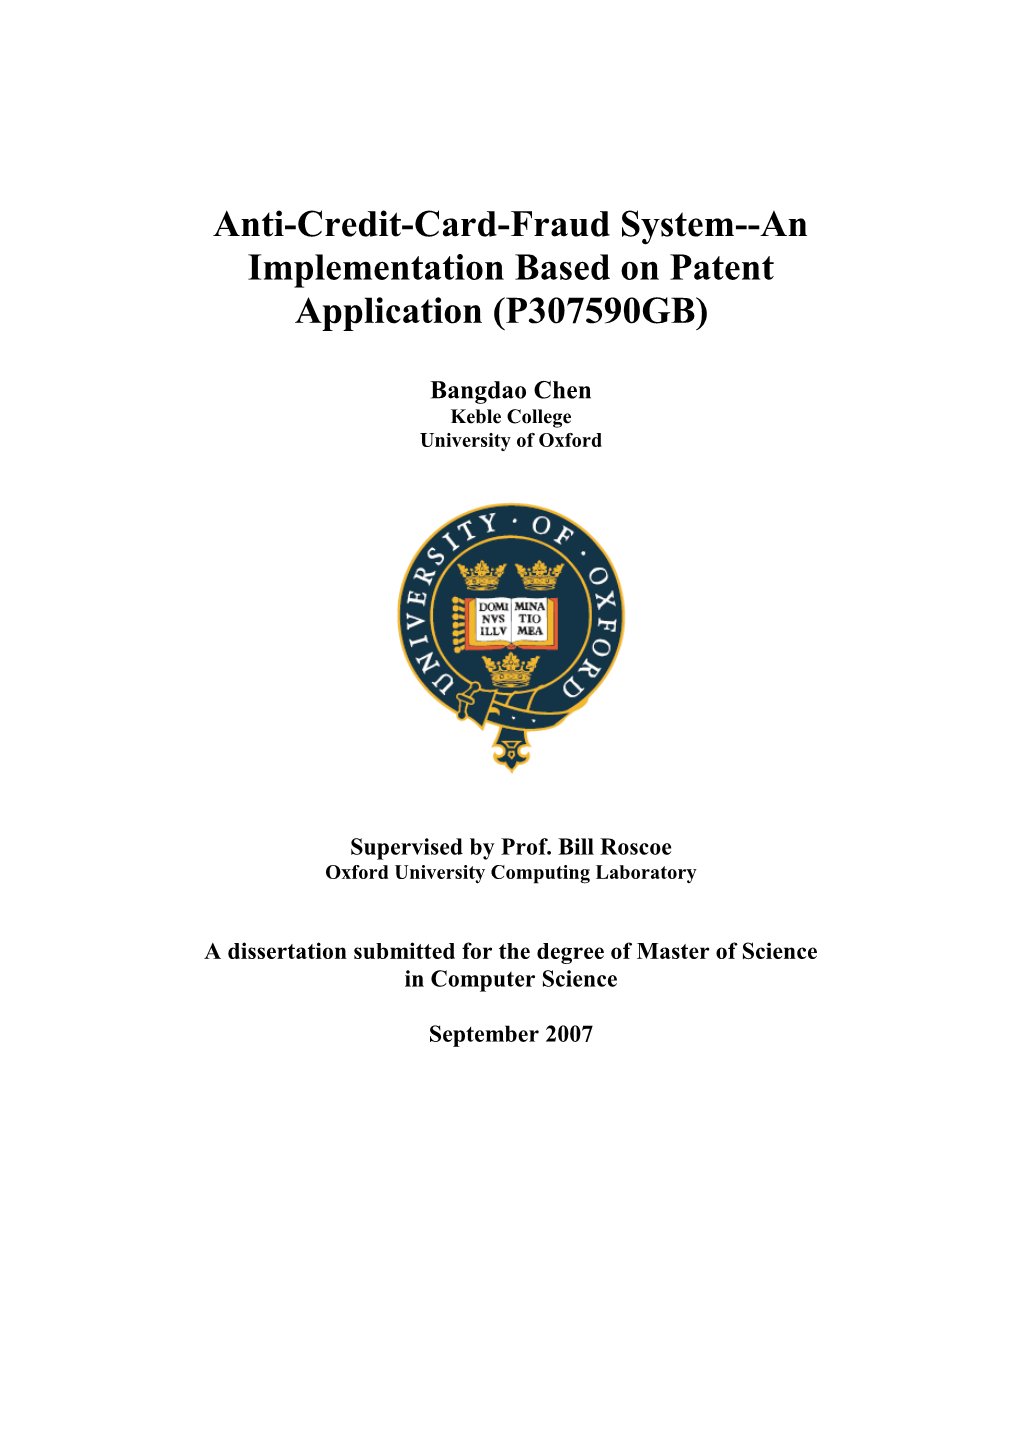 Anti-Credit-Card-Fraud System an Implementation Based on Patent Application (P307590GB)